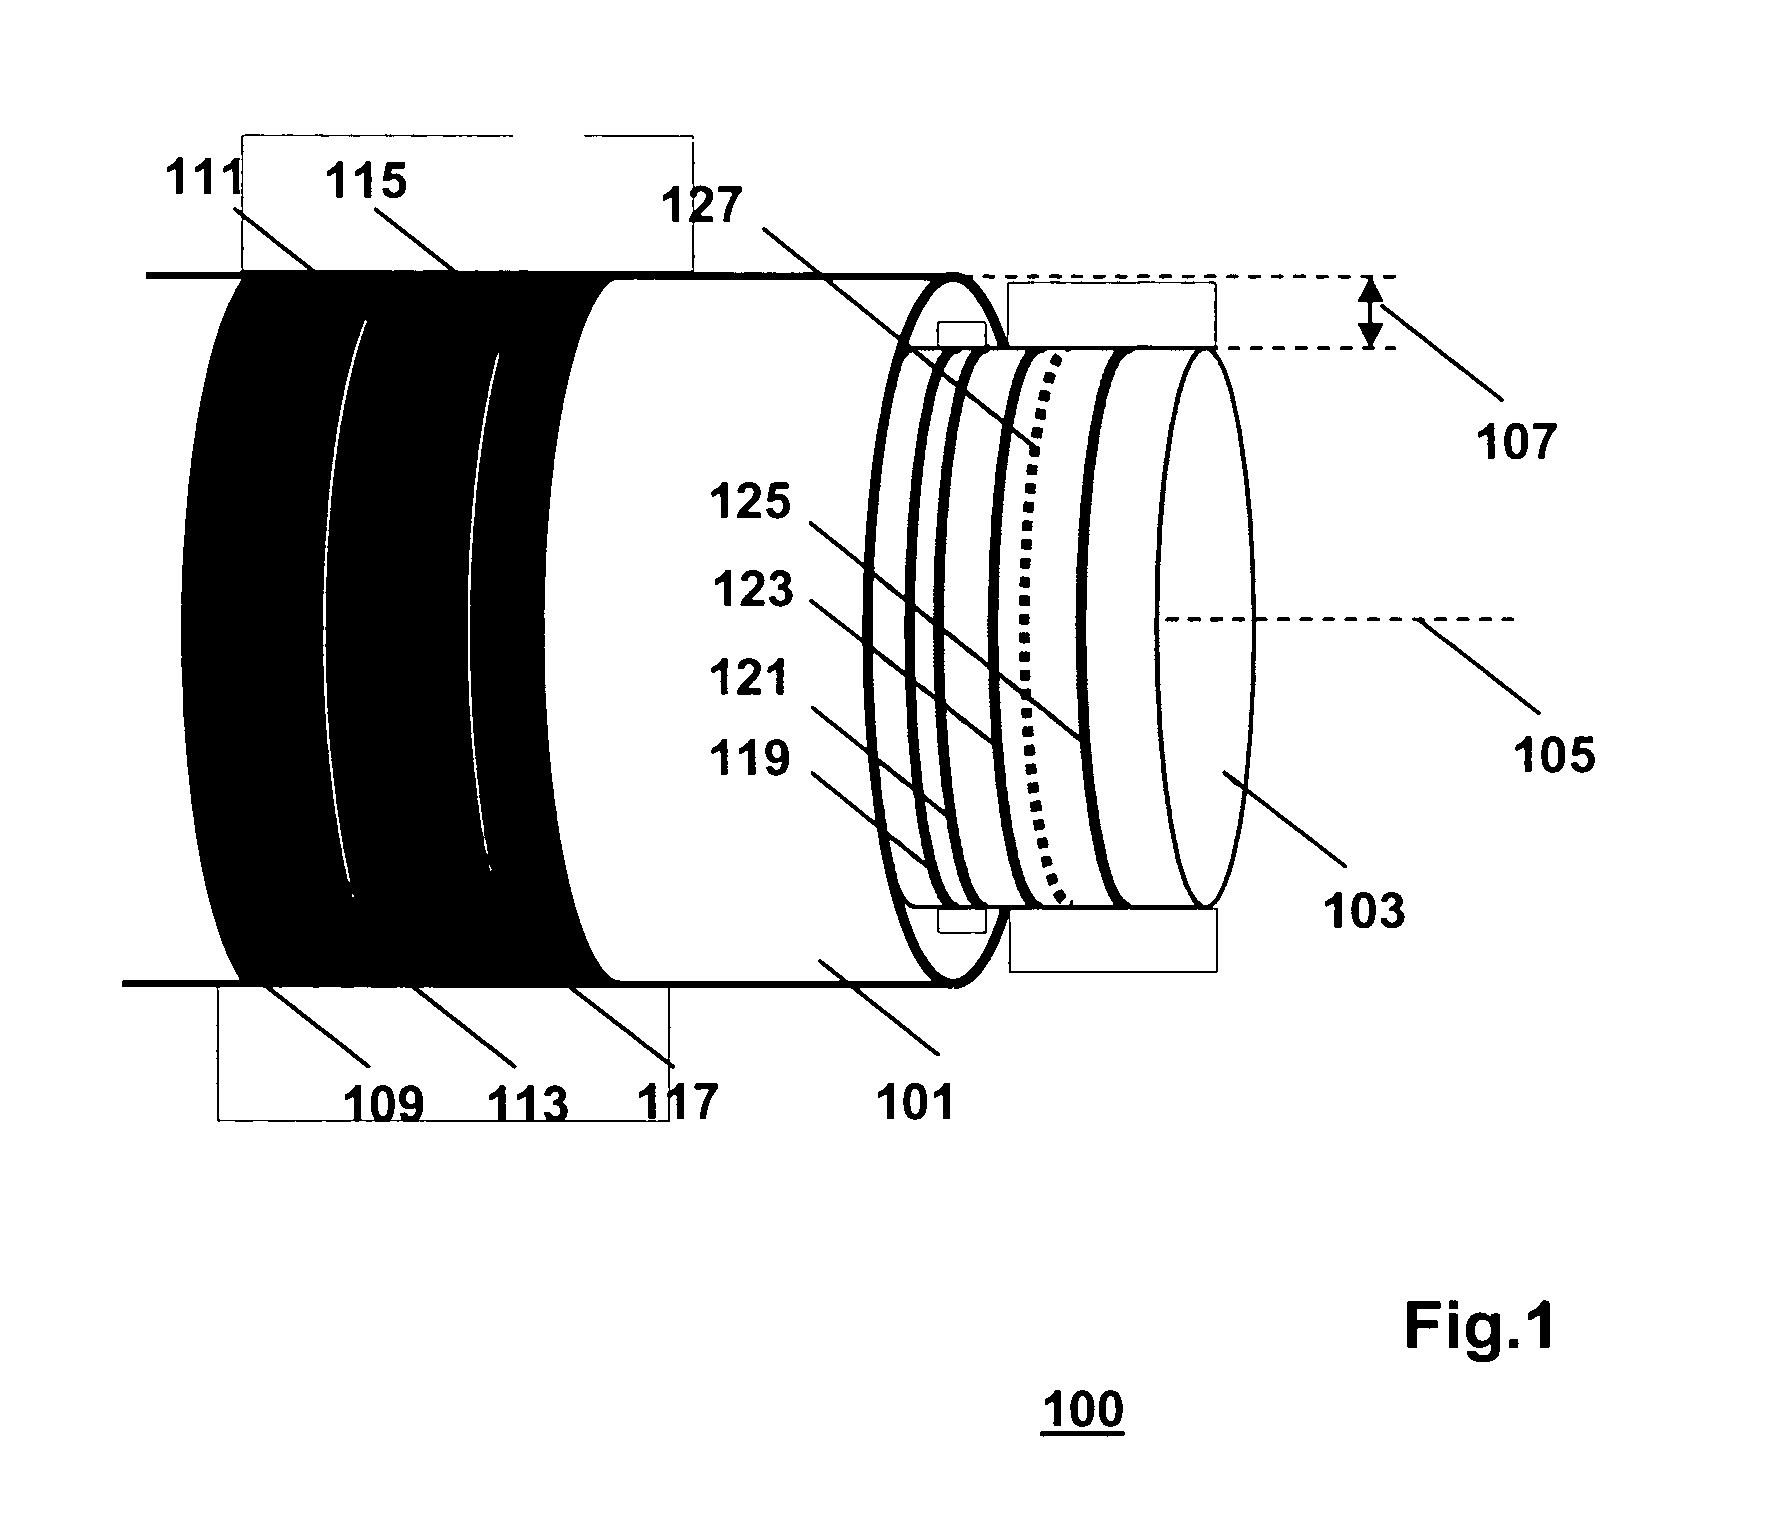 Electromagnetic actuator with integrated passive damper